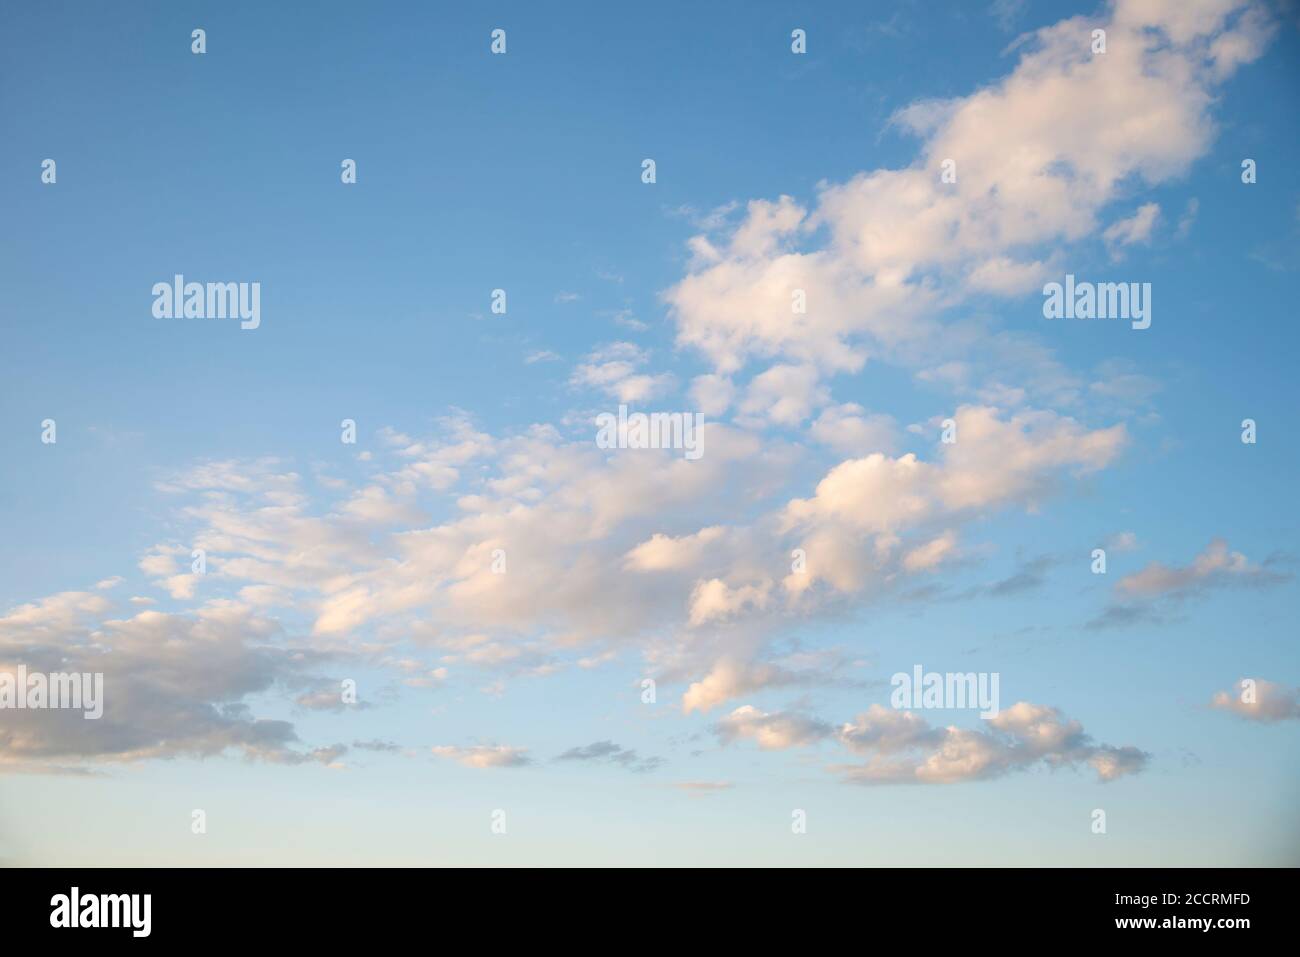 Beautiful Summer sky stratocumulus cloud formations for use as background Stock Photo